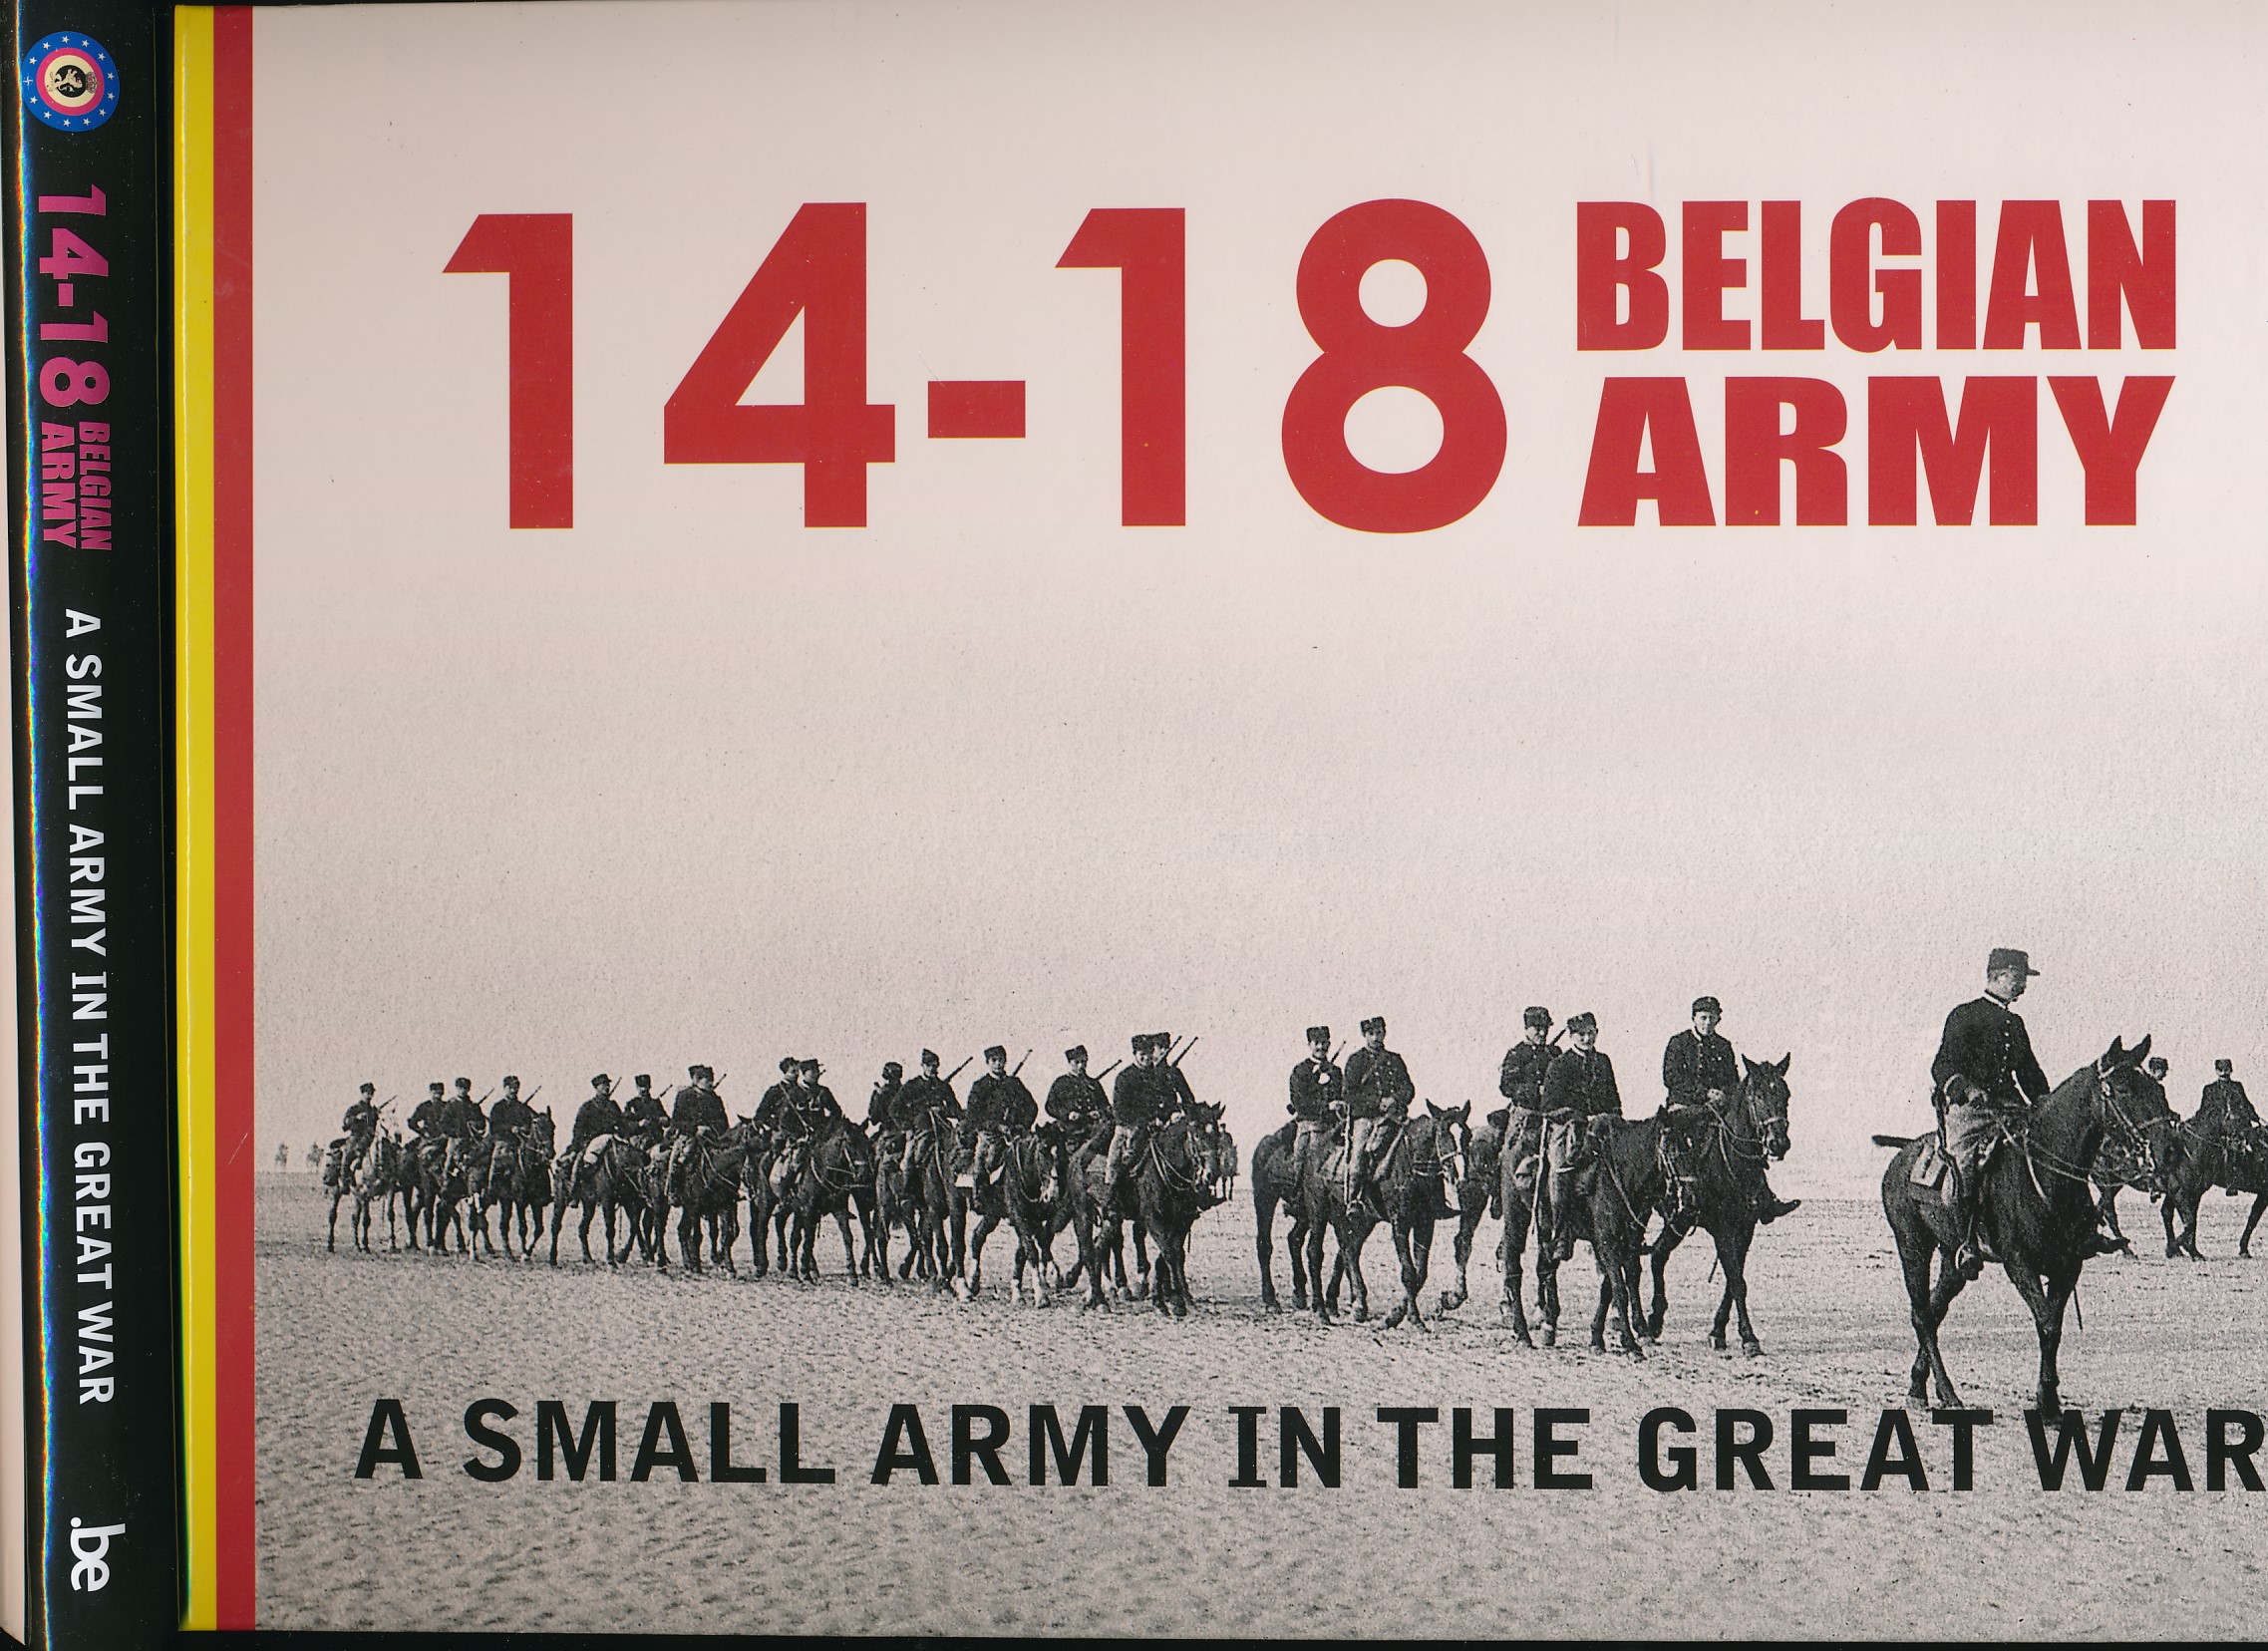 14-18 Belgian Army. A Small Army in the Great War